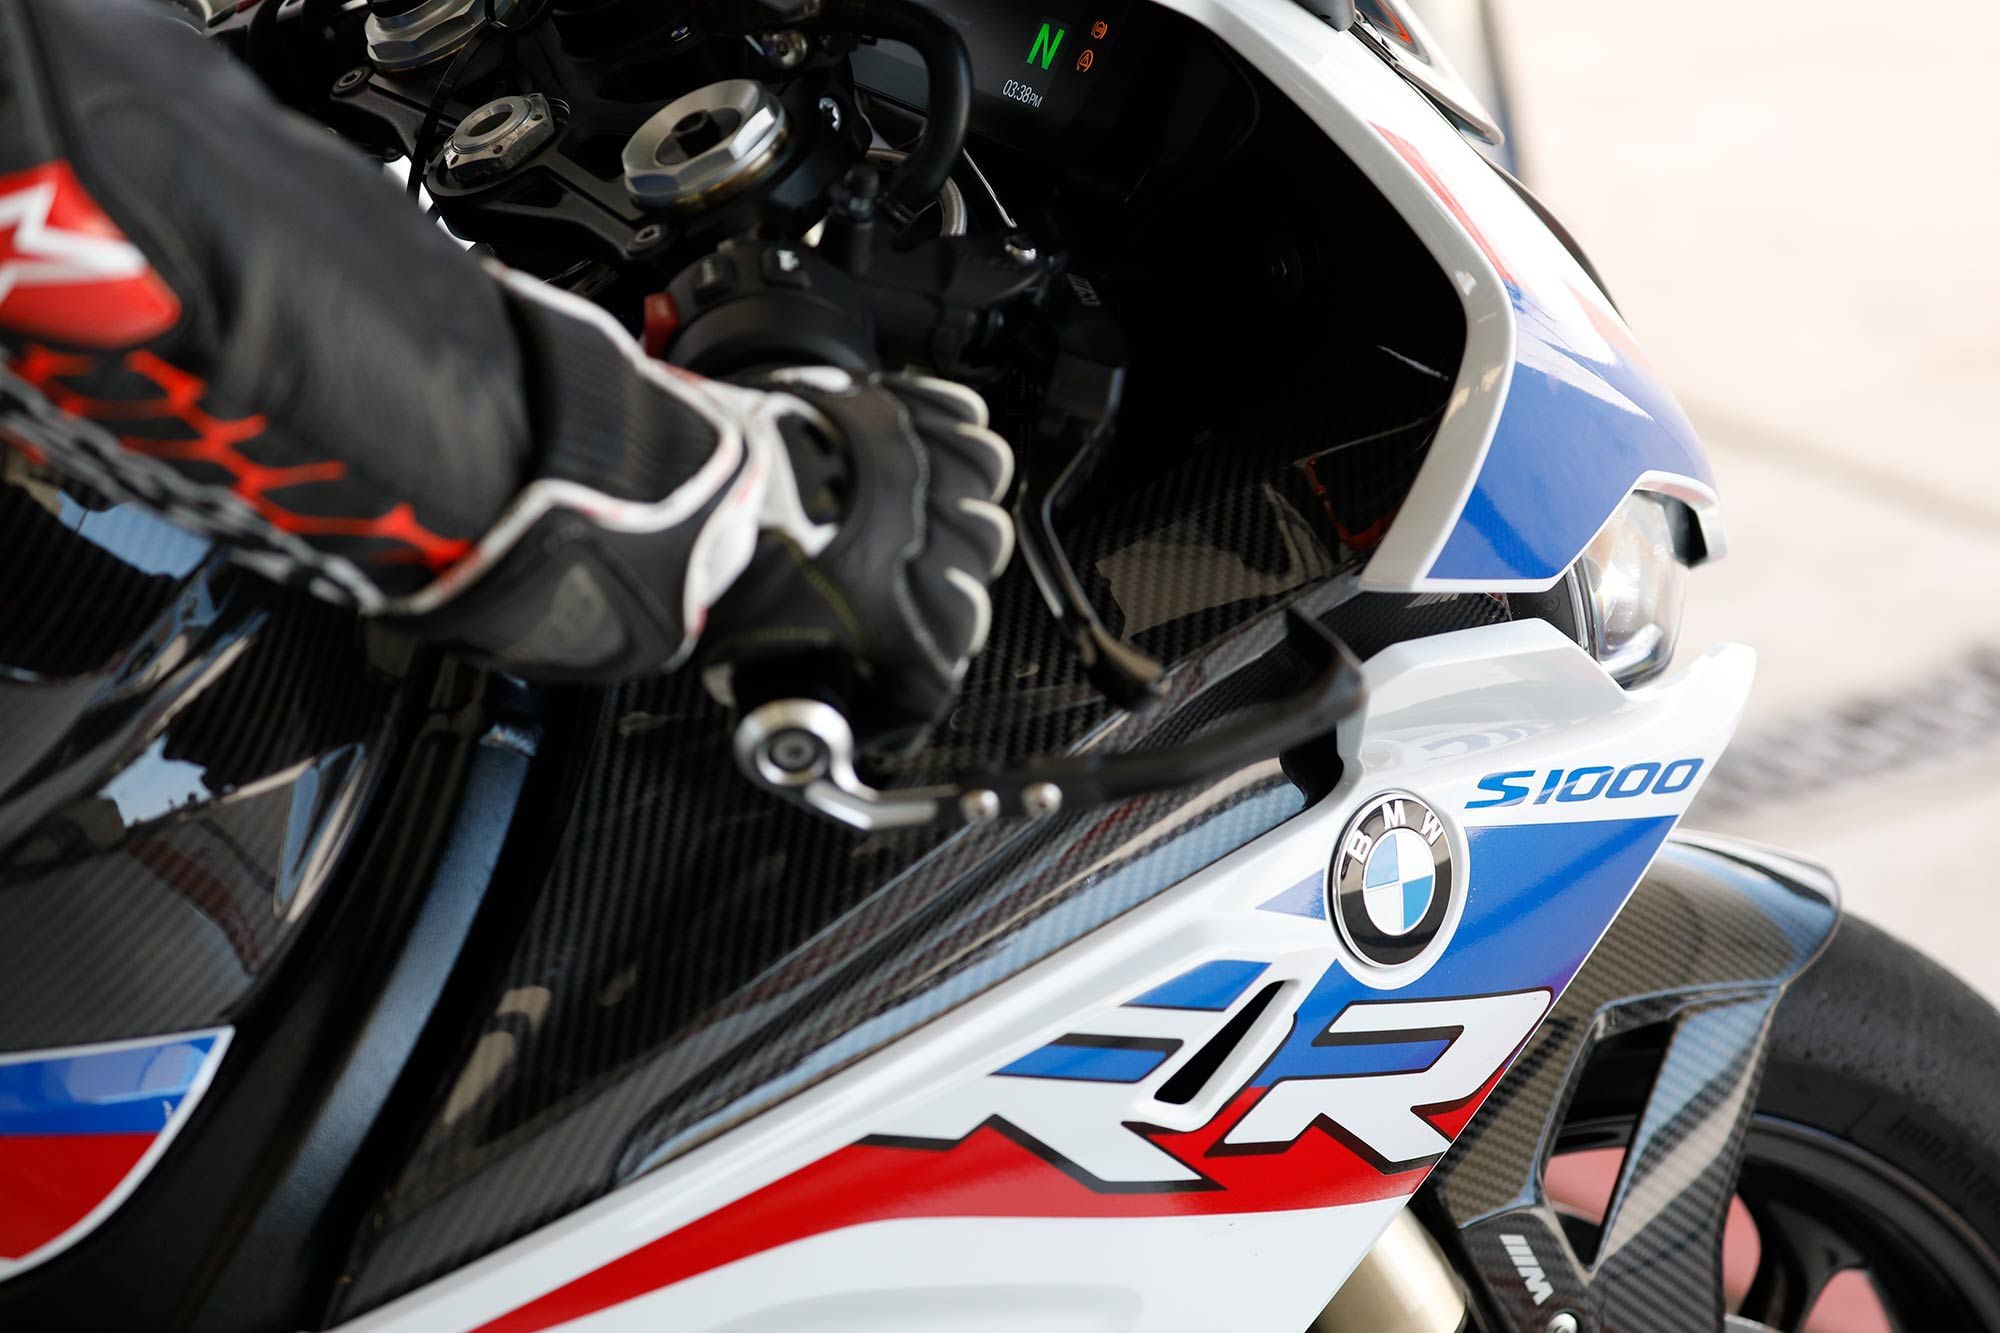 Nate Kern Trackdays and BMW Motorrad USA team up to host Double R Fest at Circuit of The Americas in Austin, Texas.